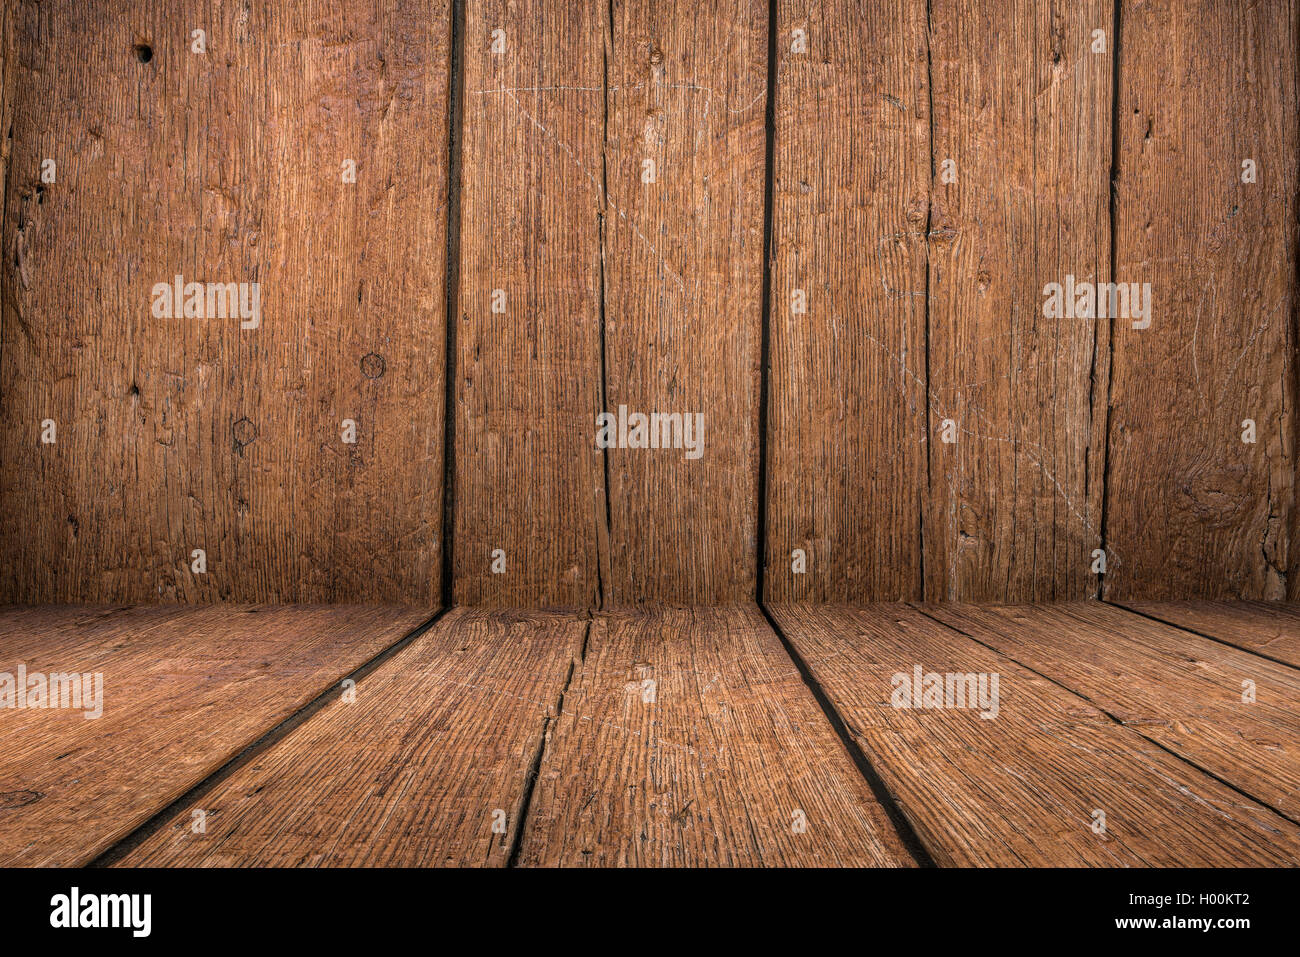 old wood texture background Stock Photo